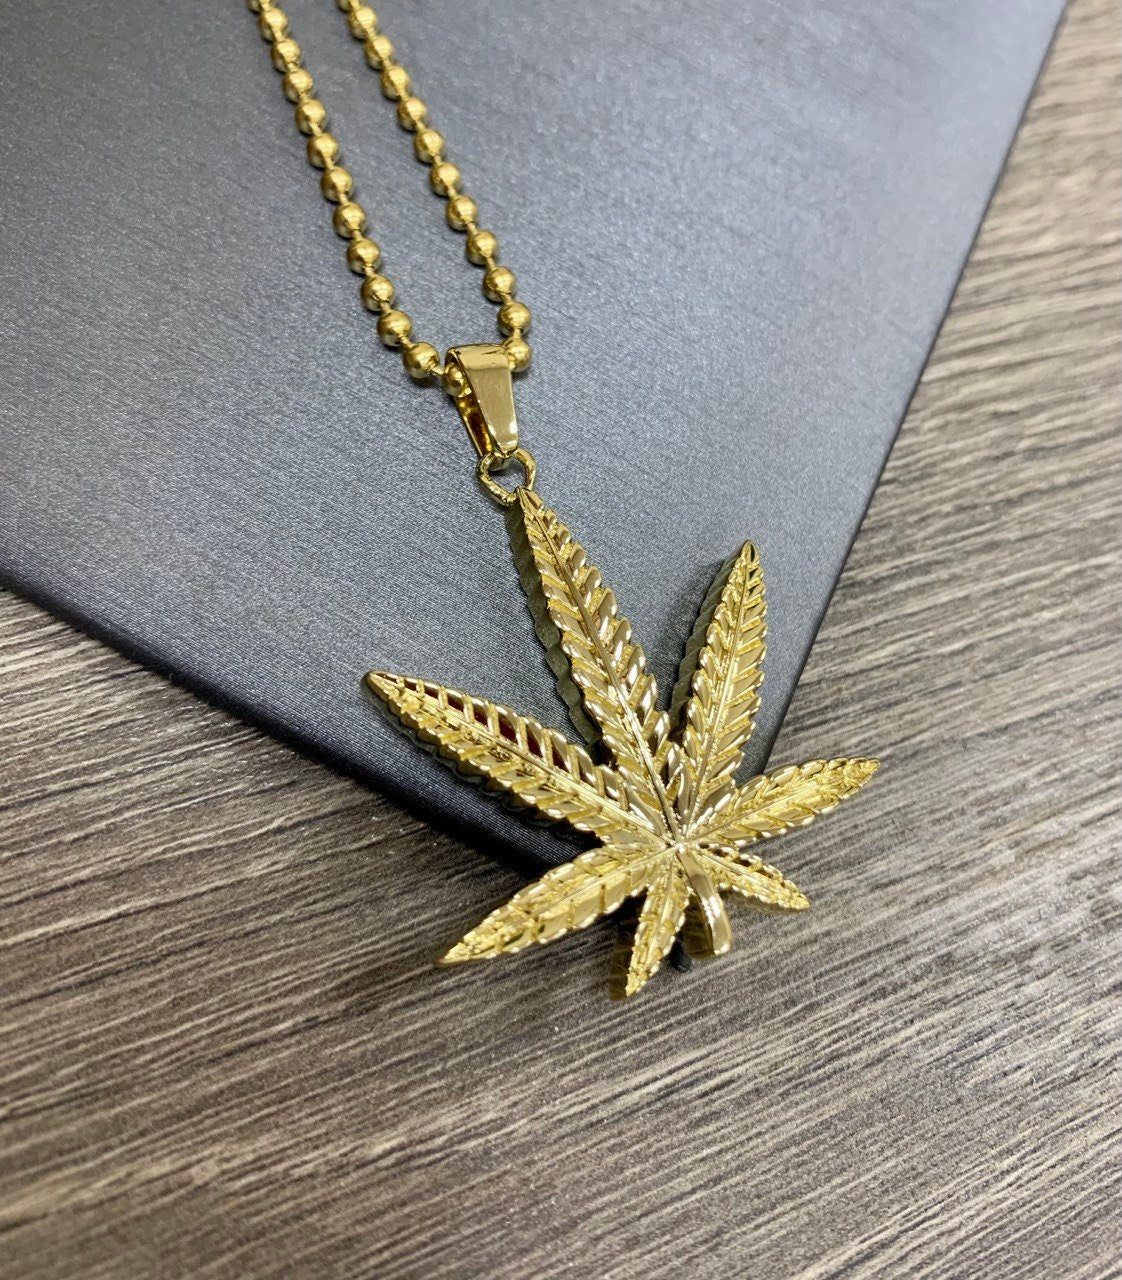 18k Gold Filled Fancy Cannabis Pendant Charms Wholesale Jewelry Supplies